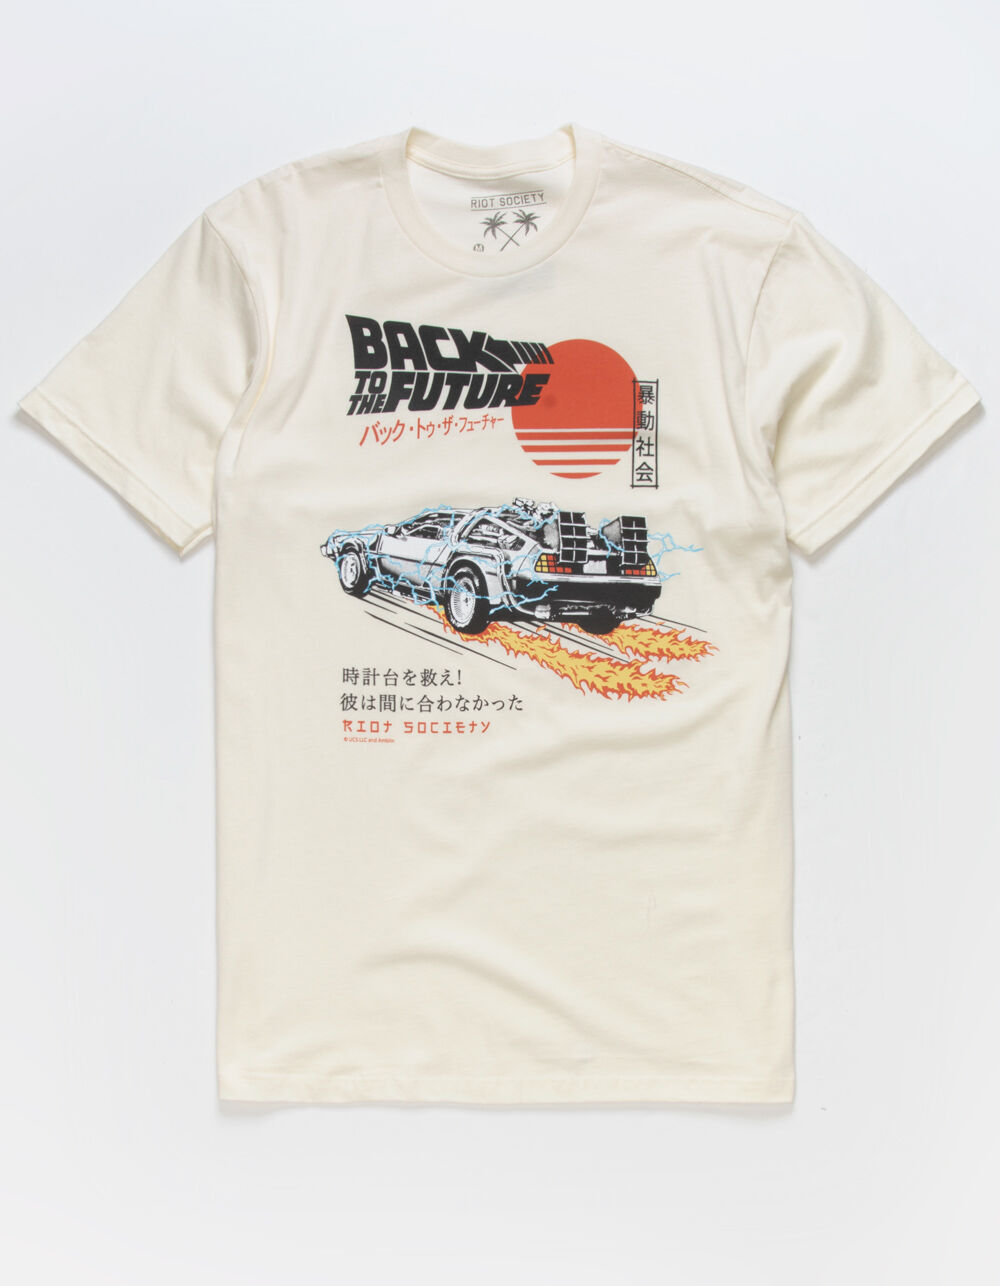 RIOT SOCIETY x Back To The Future Mens Tee